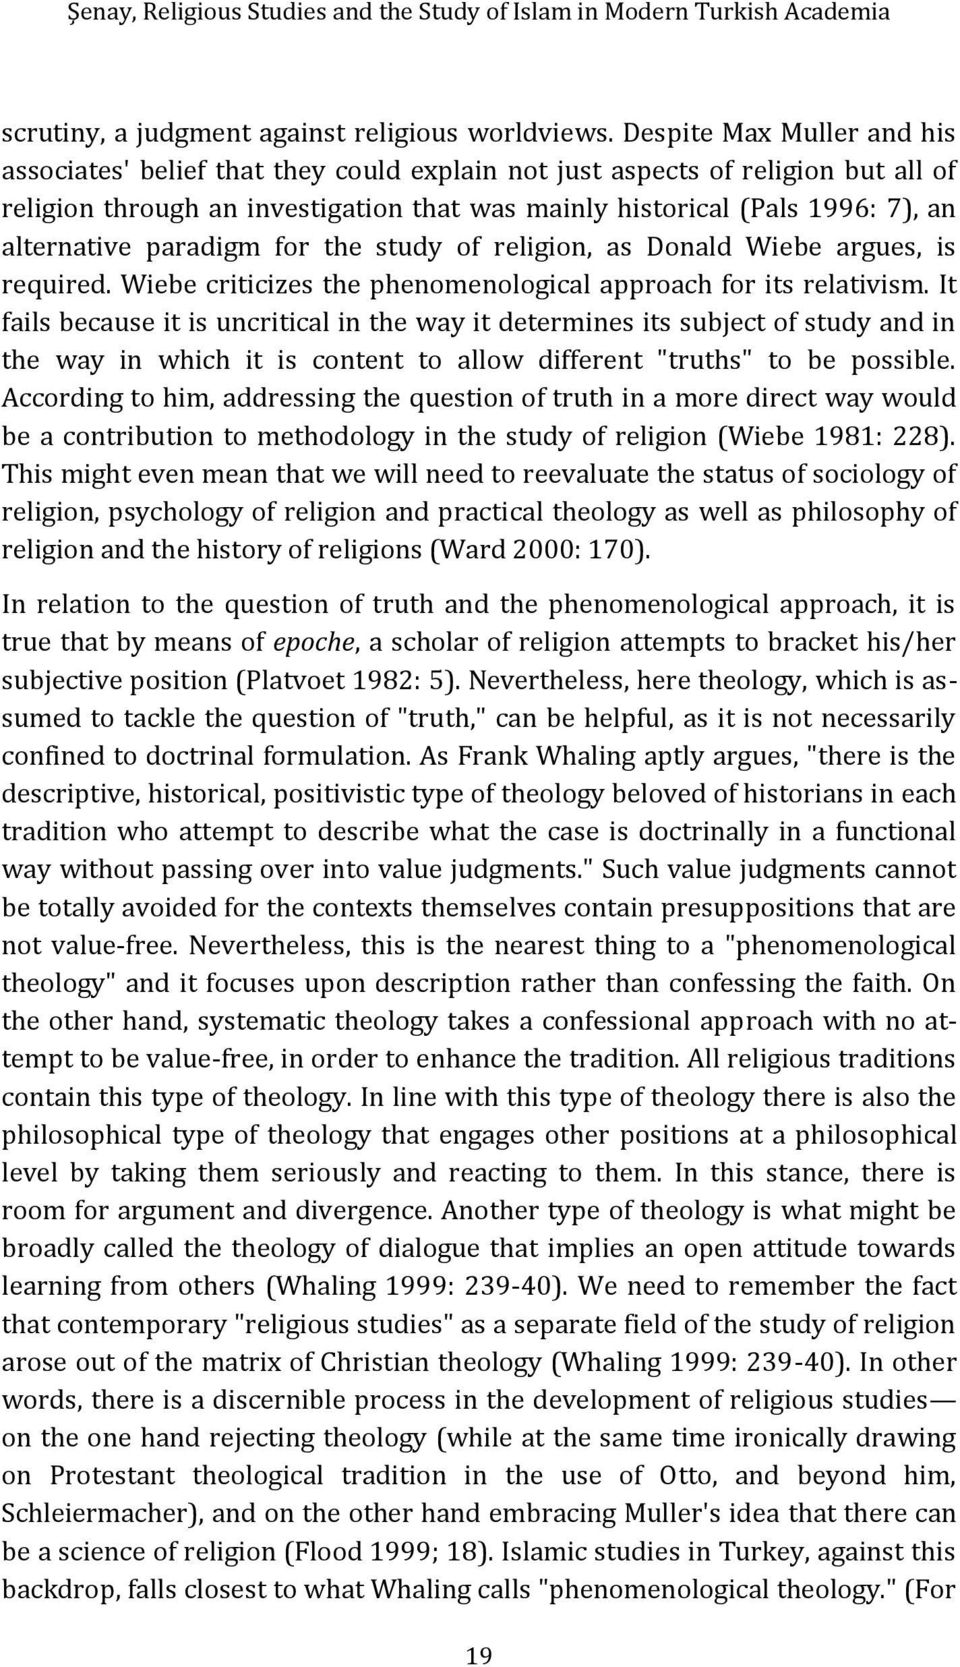 alternative paradigm for the study of religion, as Donald Wiebe argues, is required. Wiebe criticizes the phenomenological approach for its relativism.